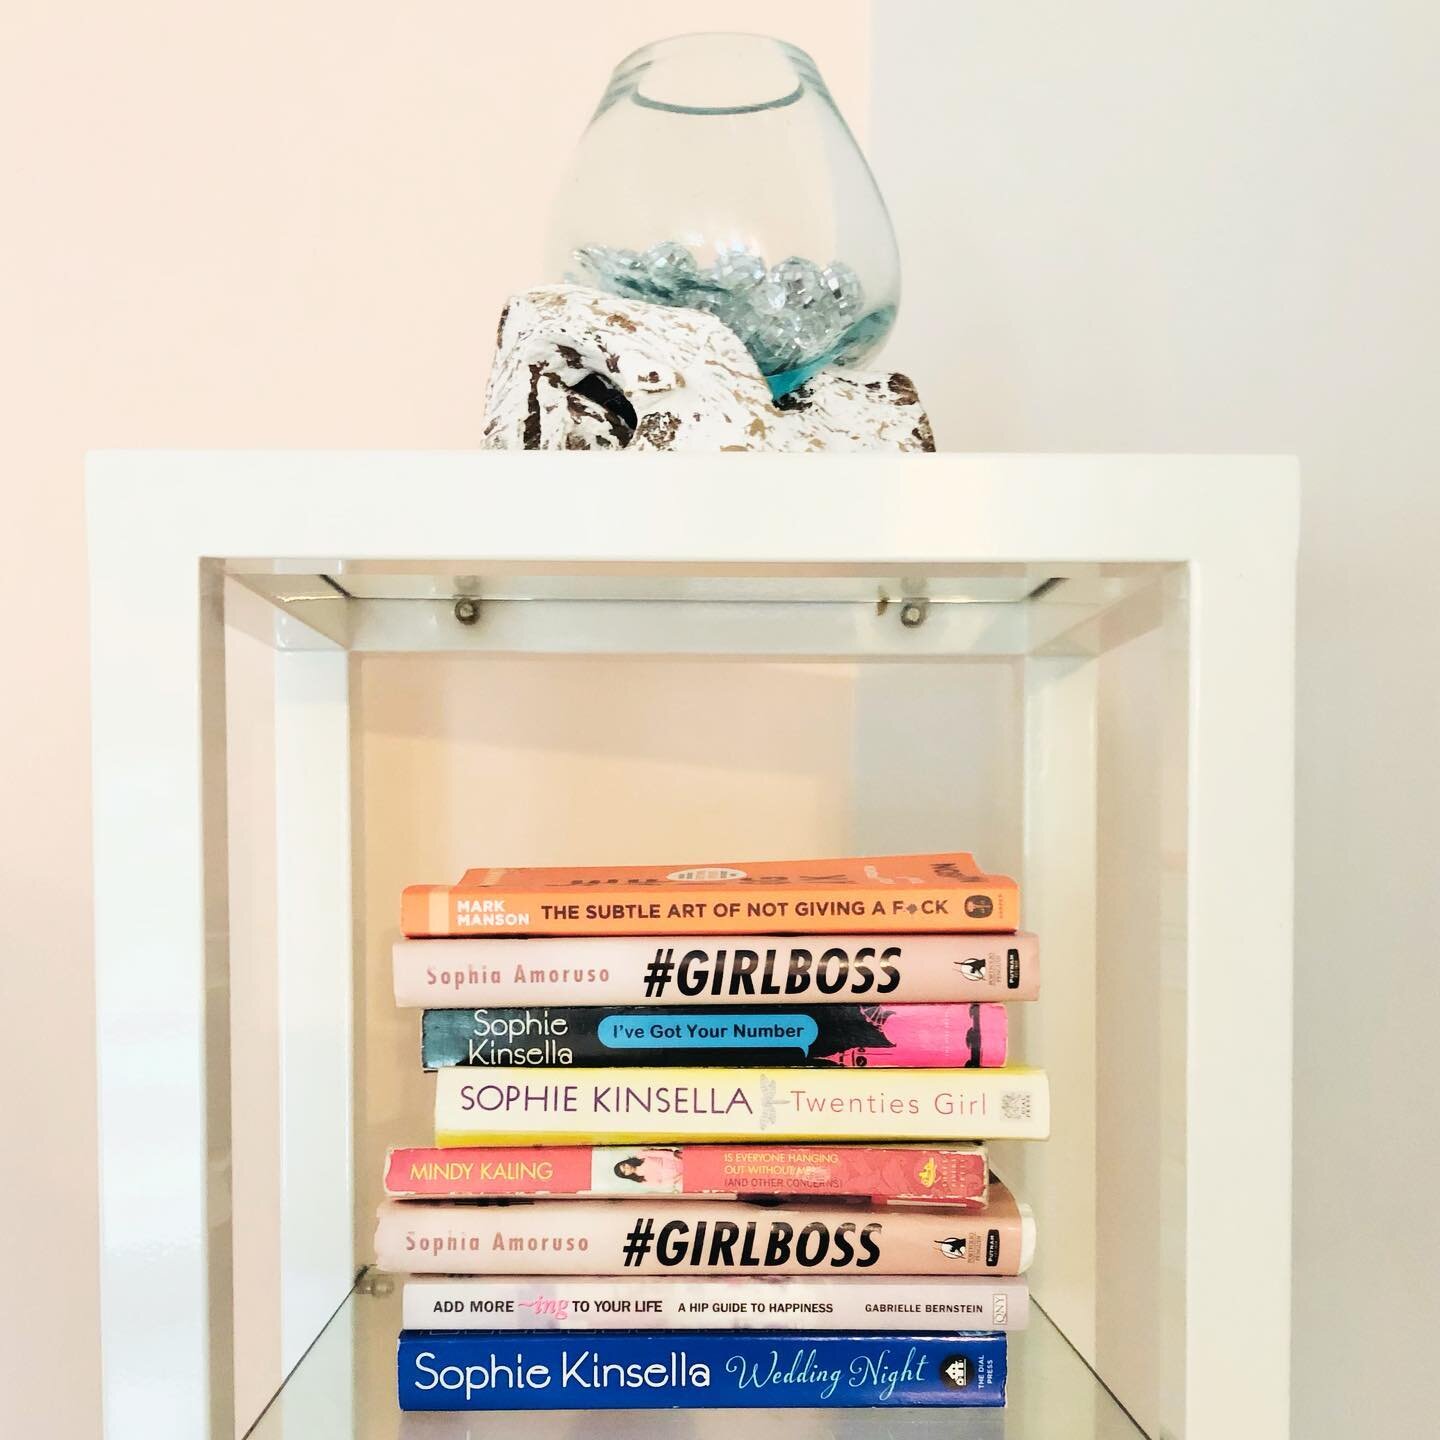 Here&rsquo;s some of our favourite reads from last year (yes there&rsquo;s 2 copies of #girlboss because one is signed by some of our favourite #girlbosses) 💁&zwj;♀️💁🏽&zwj;♀️💁🏿&zwj;♀️
.
Have any recommendations for us to read in 2022?! 
.
.
.
#b